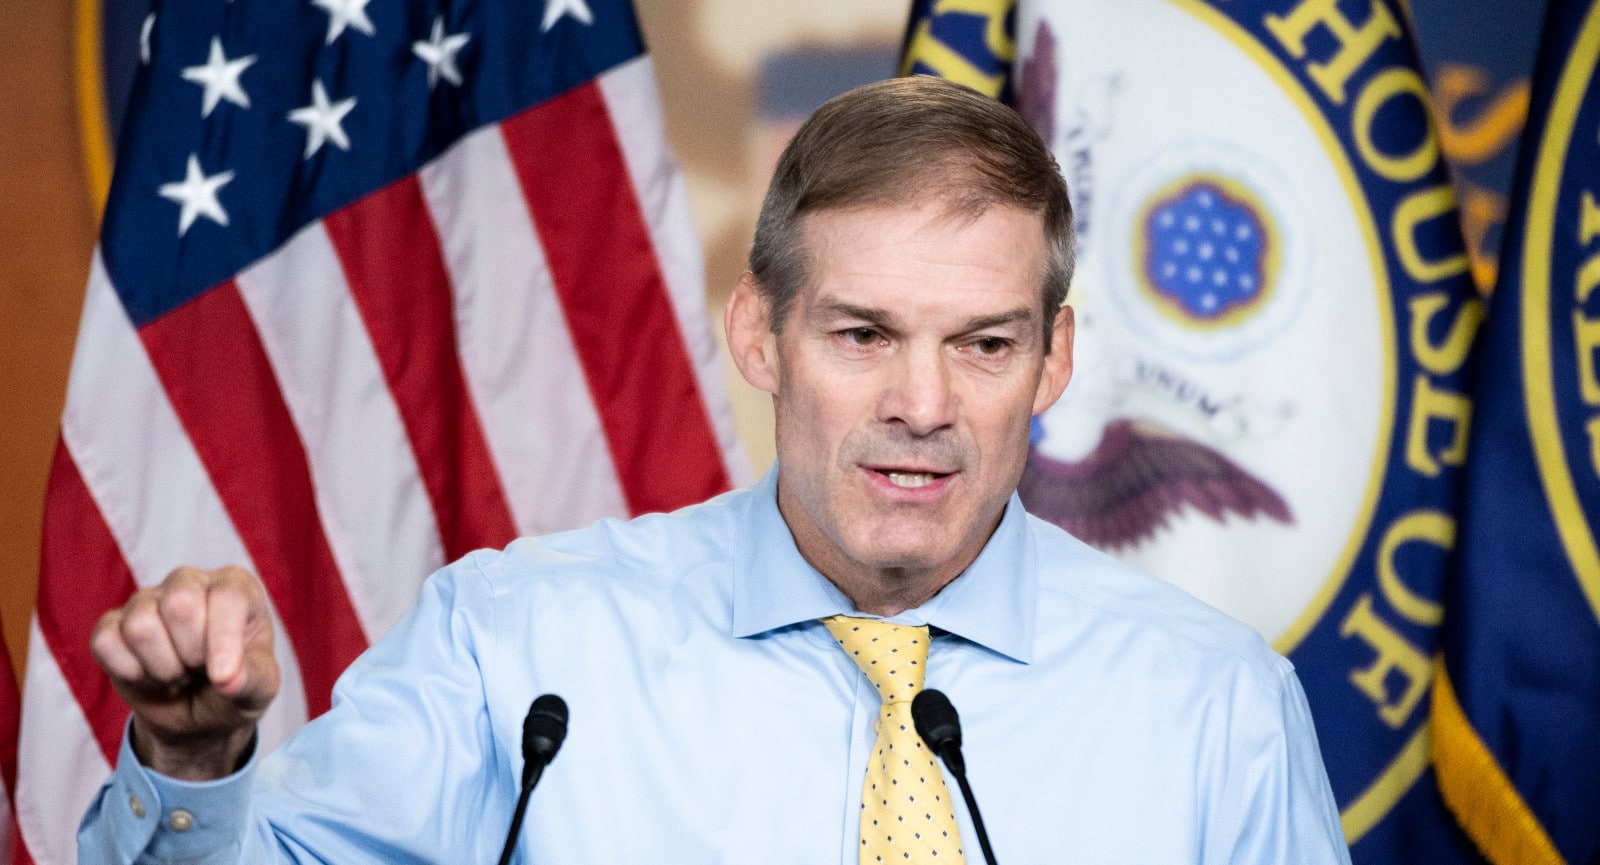 Jim Jordan Makes Big Announcement Ahead Of Speaker's Vote - Reveals First Thing He Will Do If He Is Given The Chair And Gavel